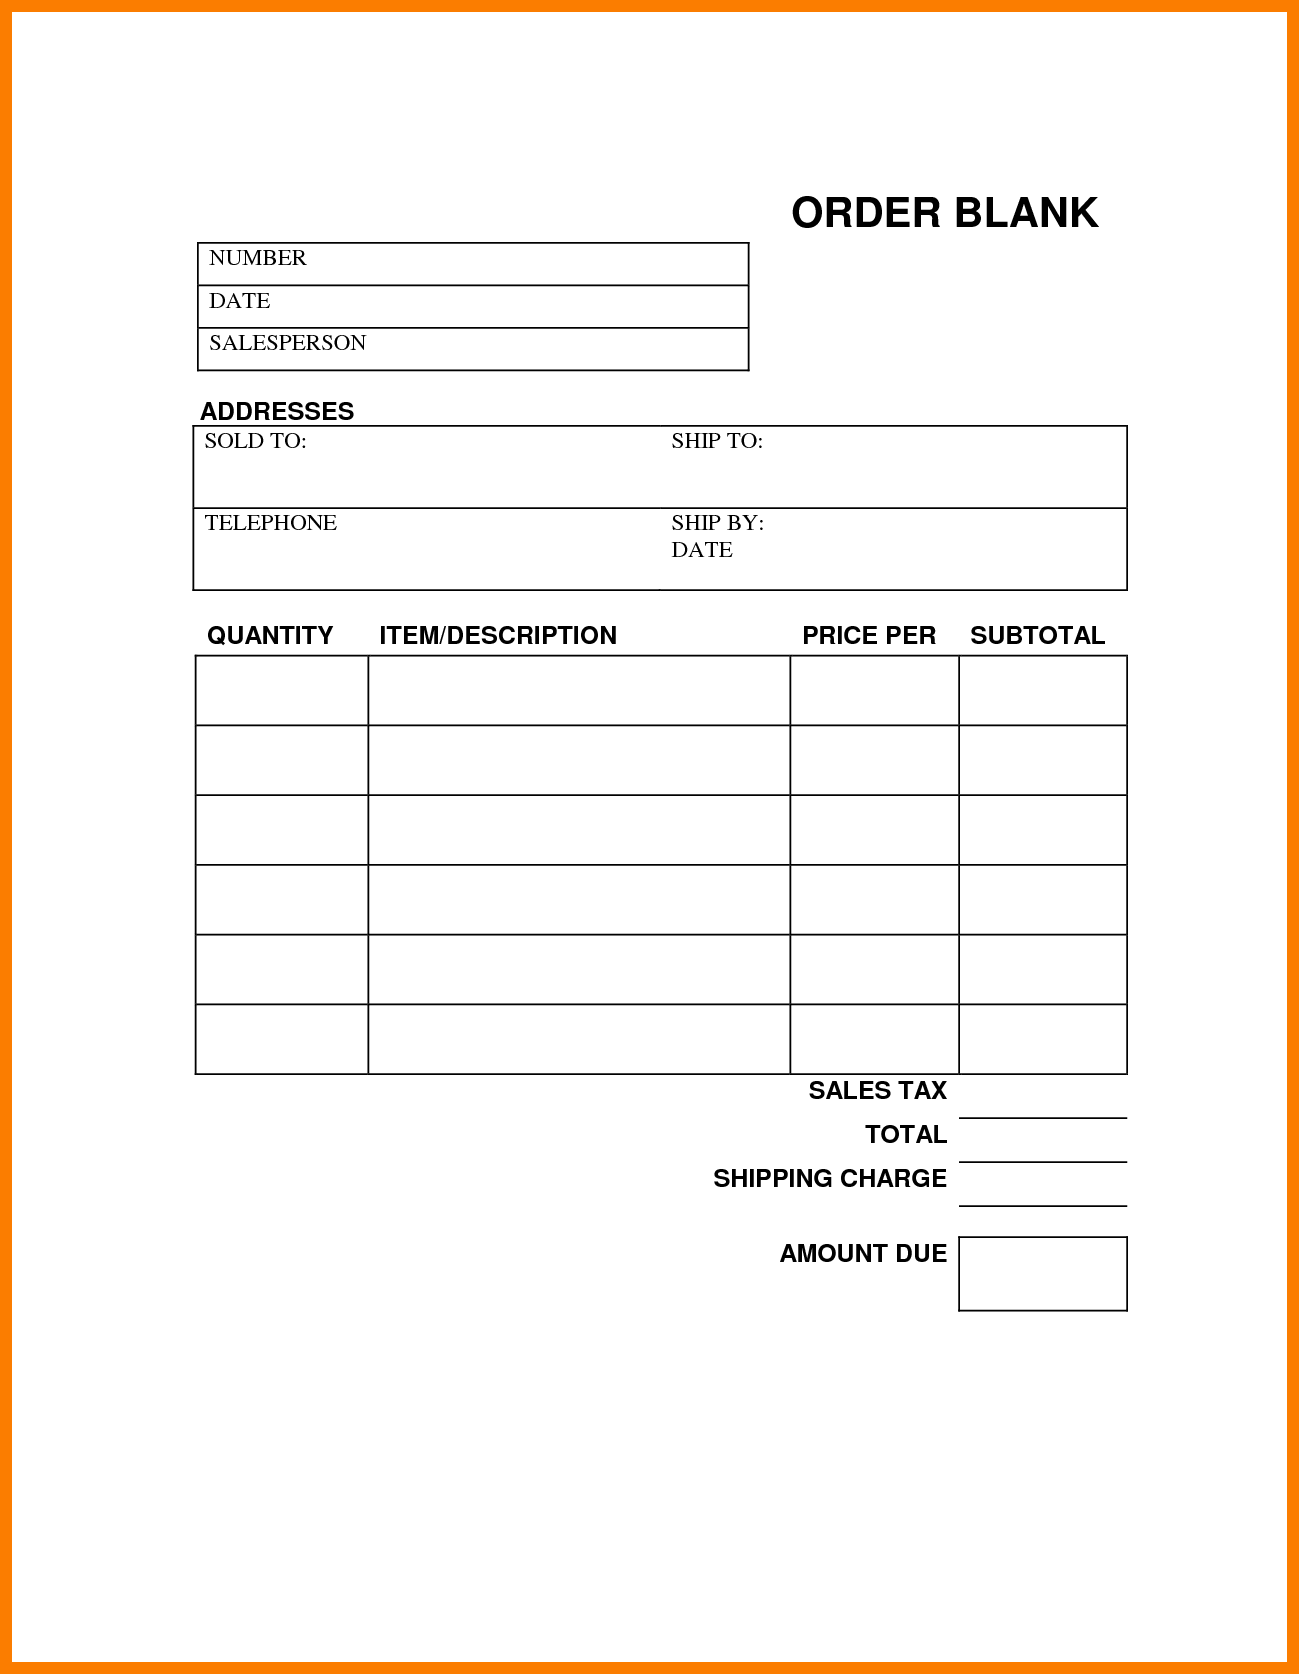 printable-order-forms-templates-charlotte-clergy-coalition